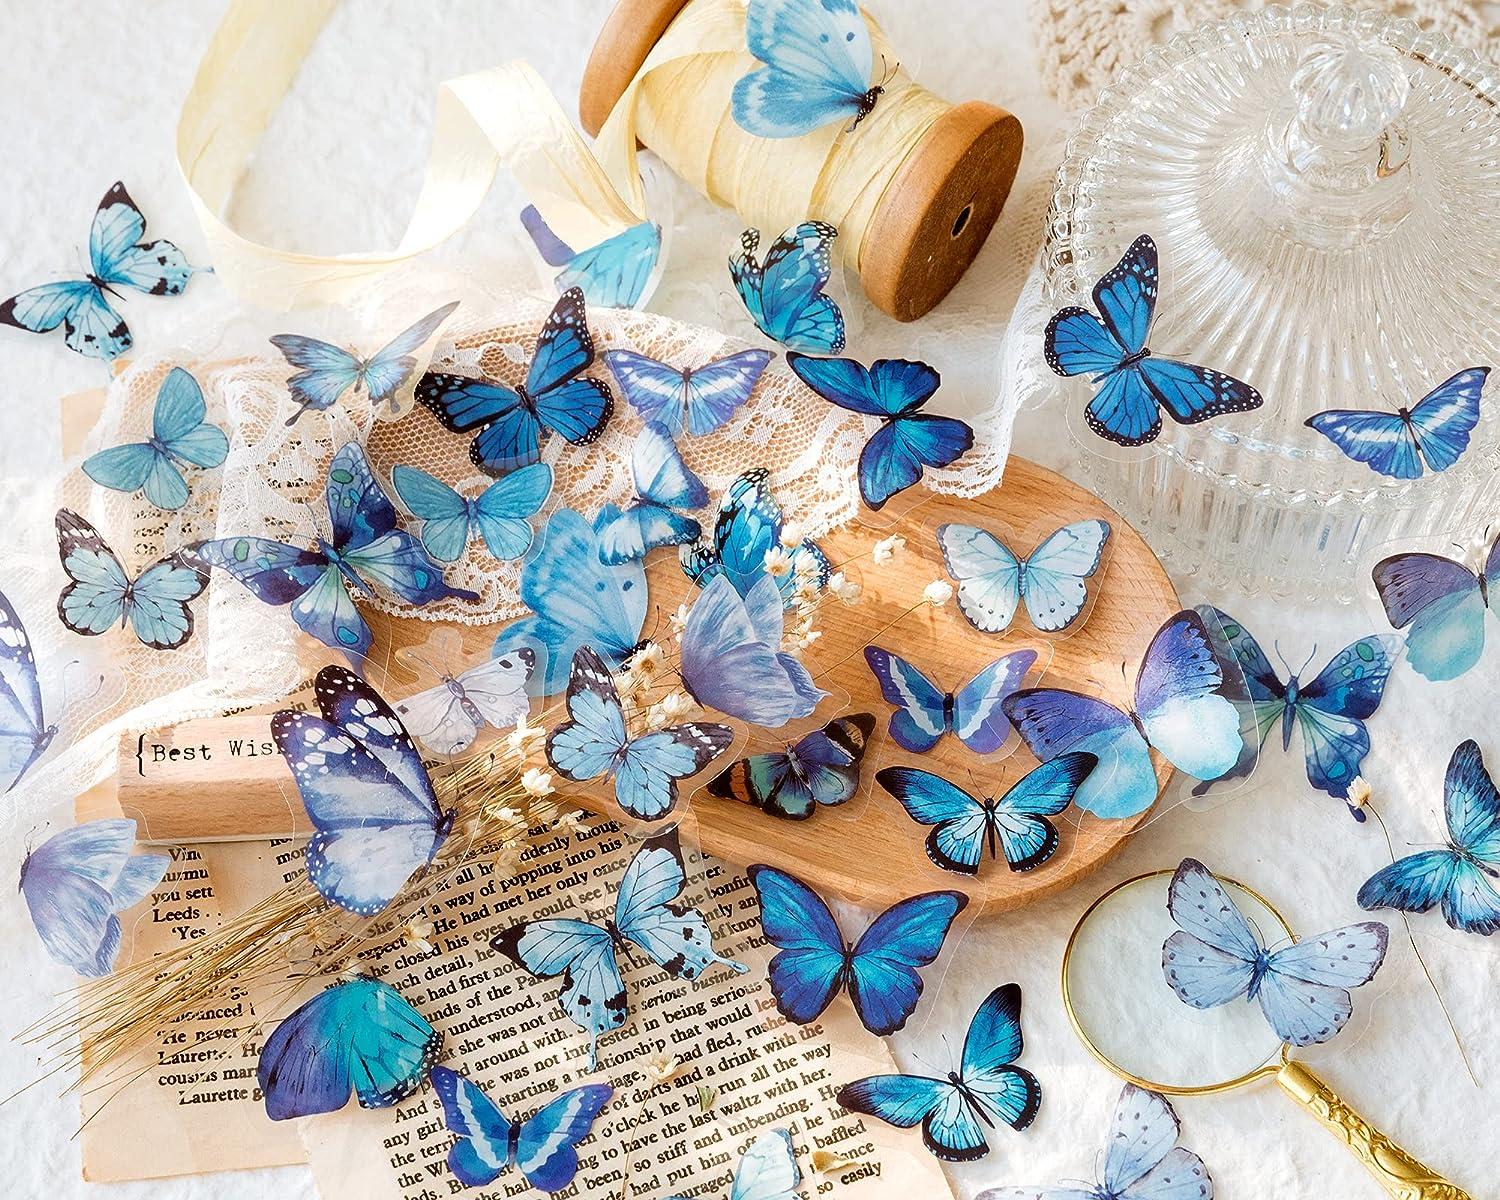 Resin Journal Covers with Dried Flowers, Butterflies & Gold Leaf